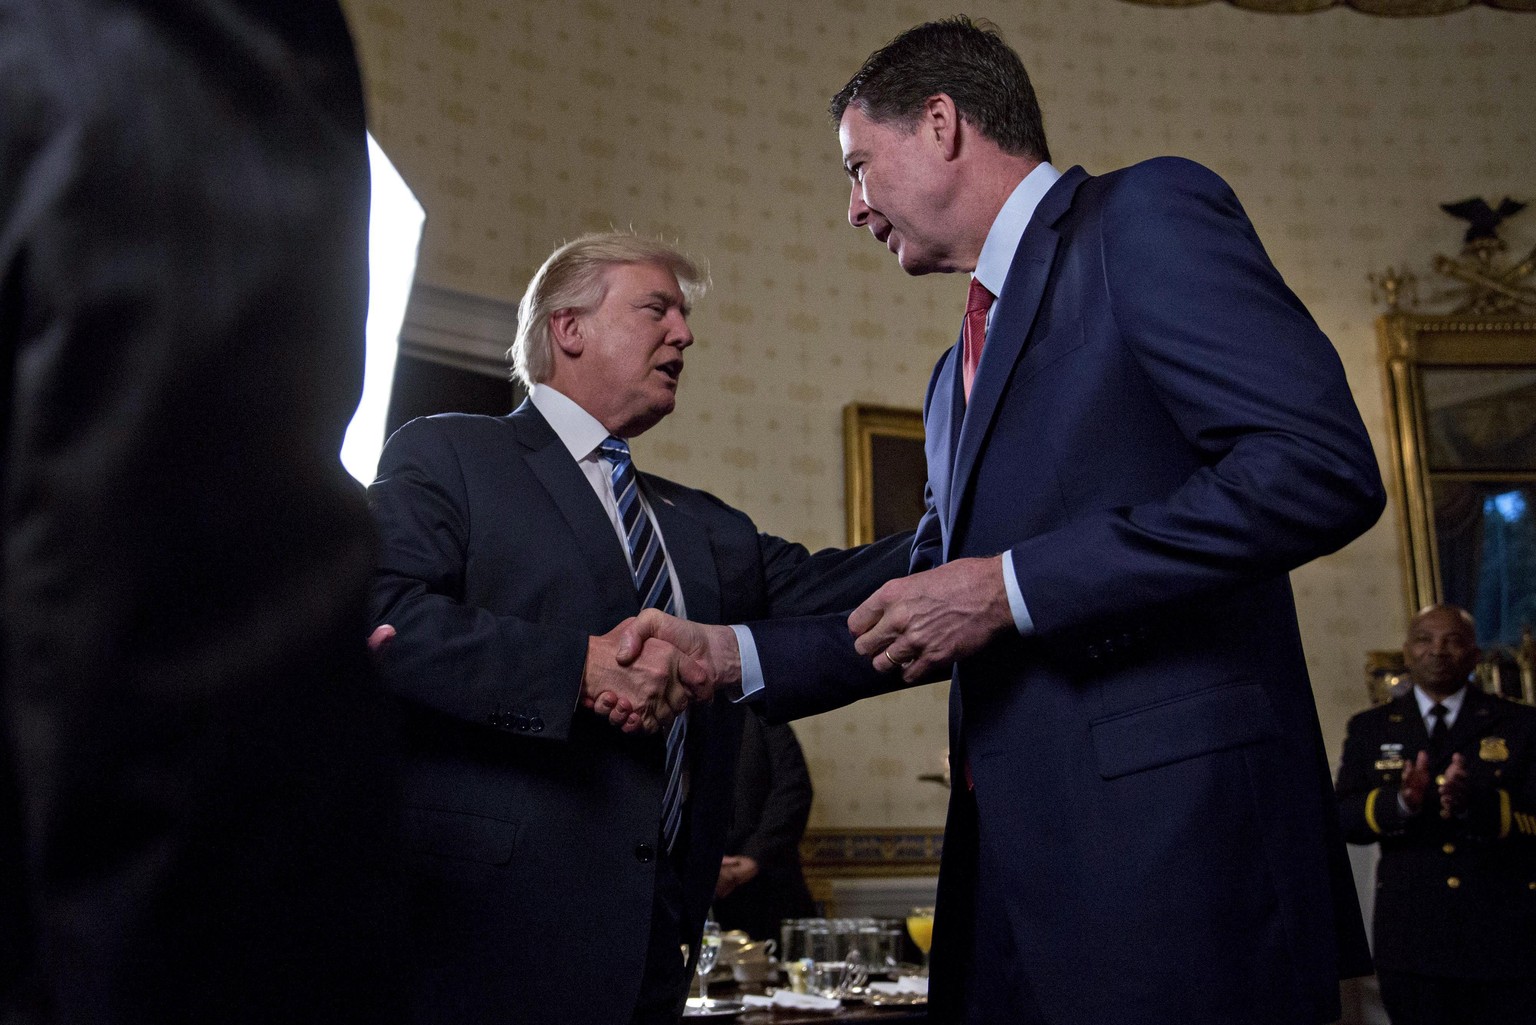 epa05742575 US President Donald J. Trump, center, shakes hands with James Comey, director of the Federal Bureau of Investigation (FBI), during an Inaugural Law Enforcement Officers and First Responder ...